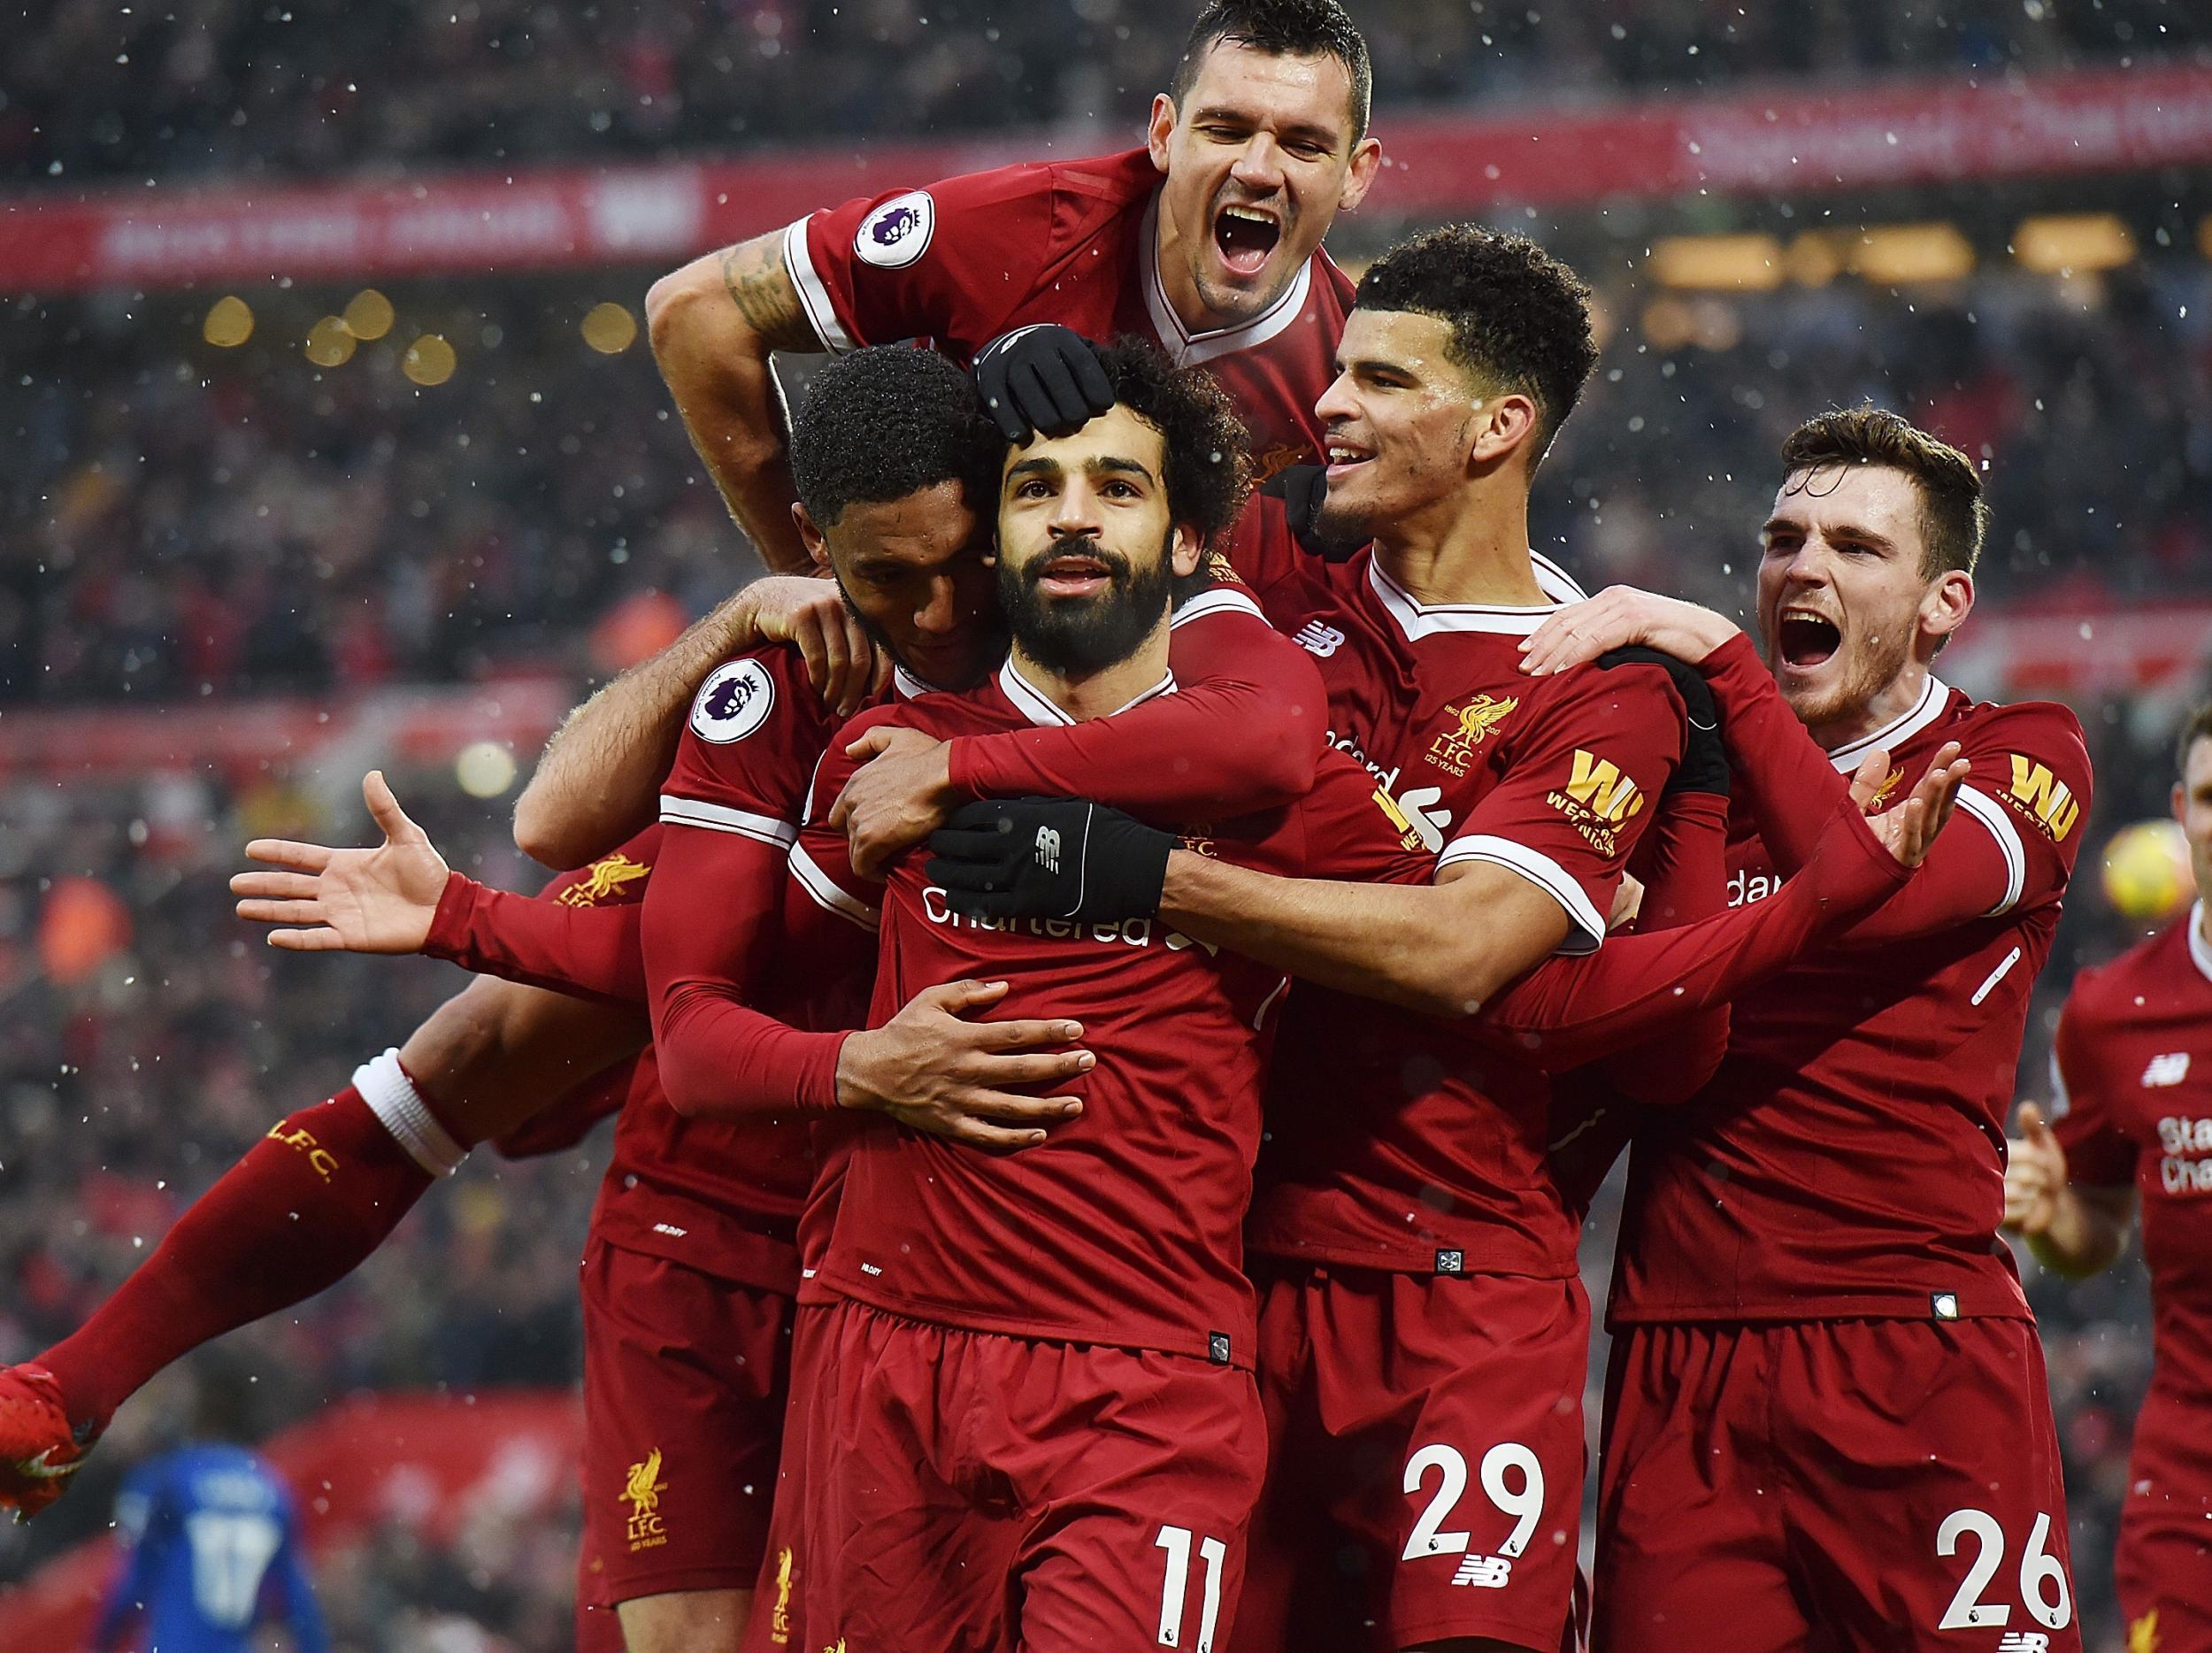 The Liverpool players mob their goalscorer, Mohamed Salah